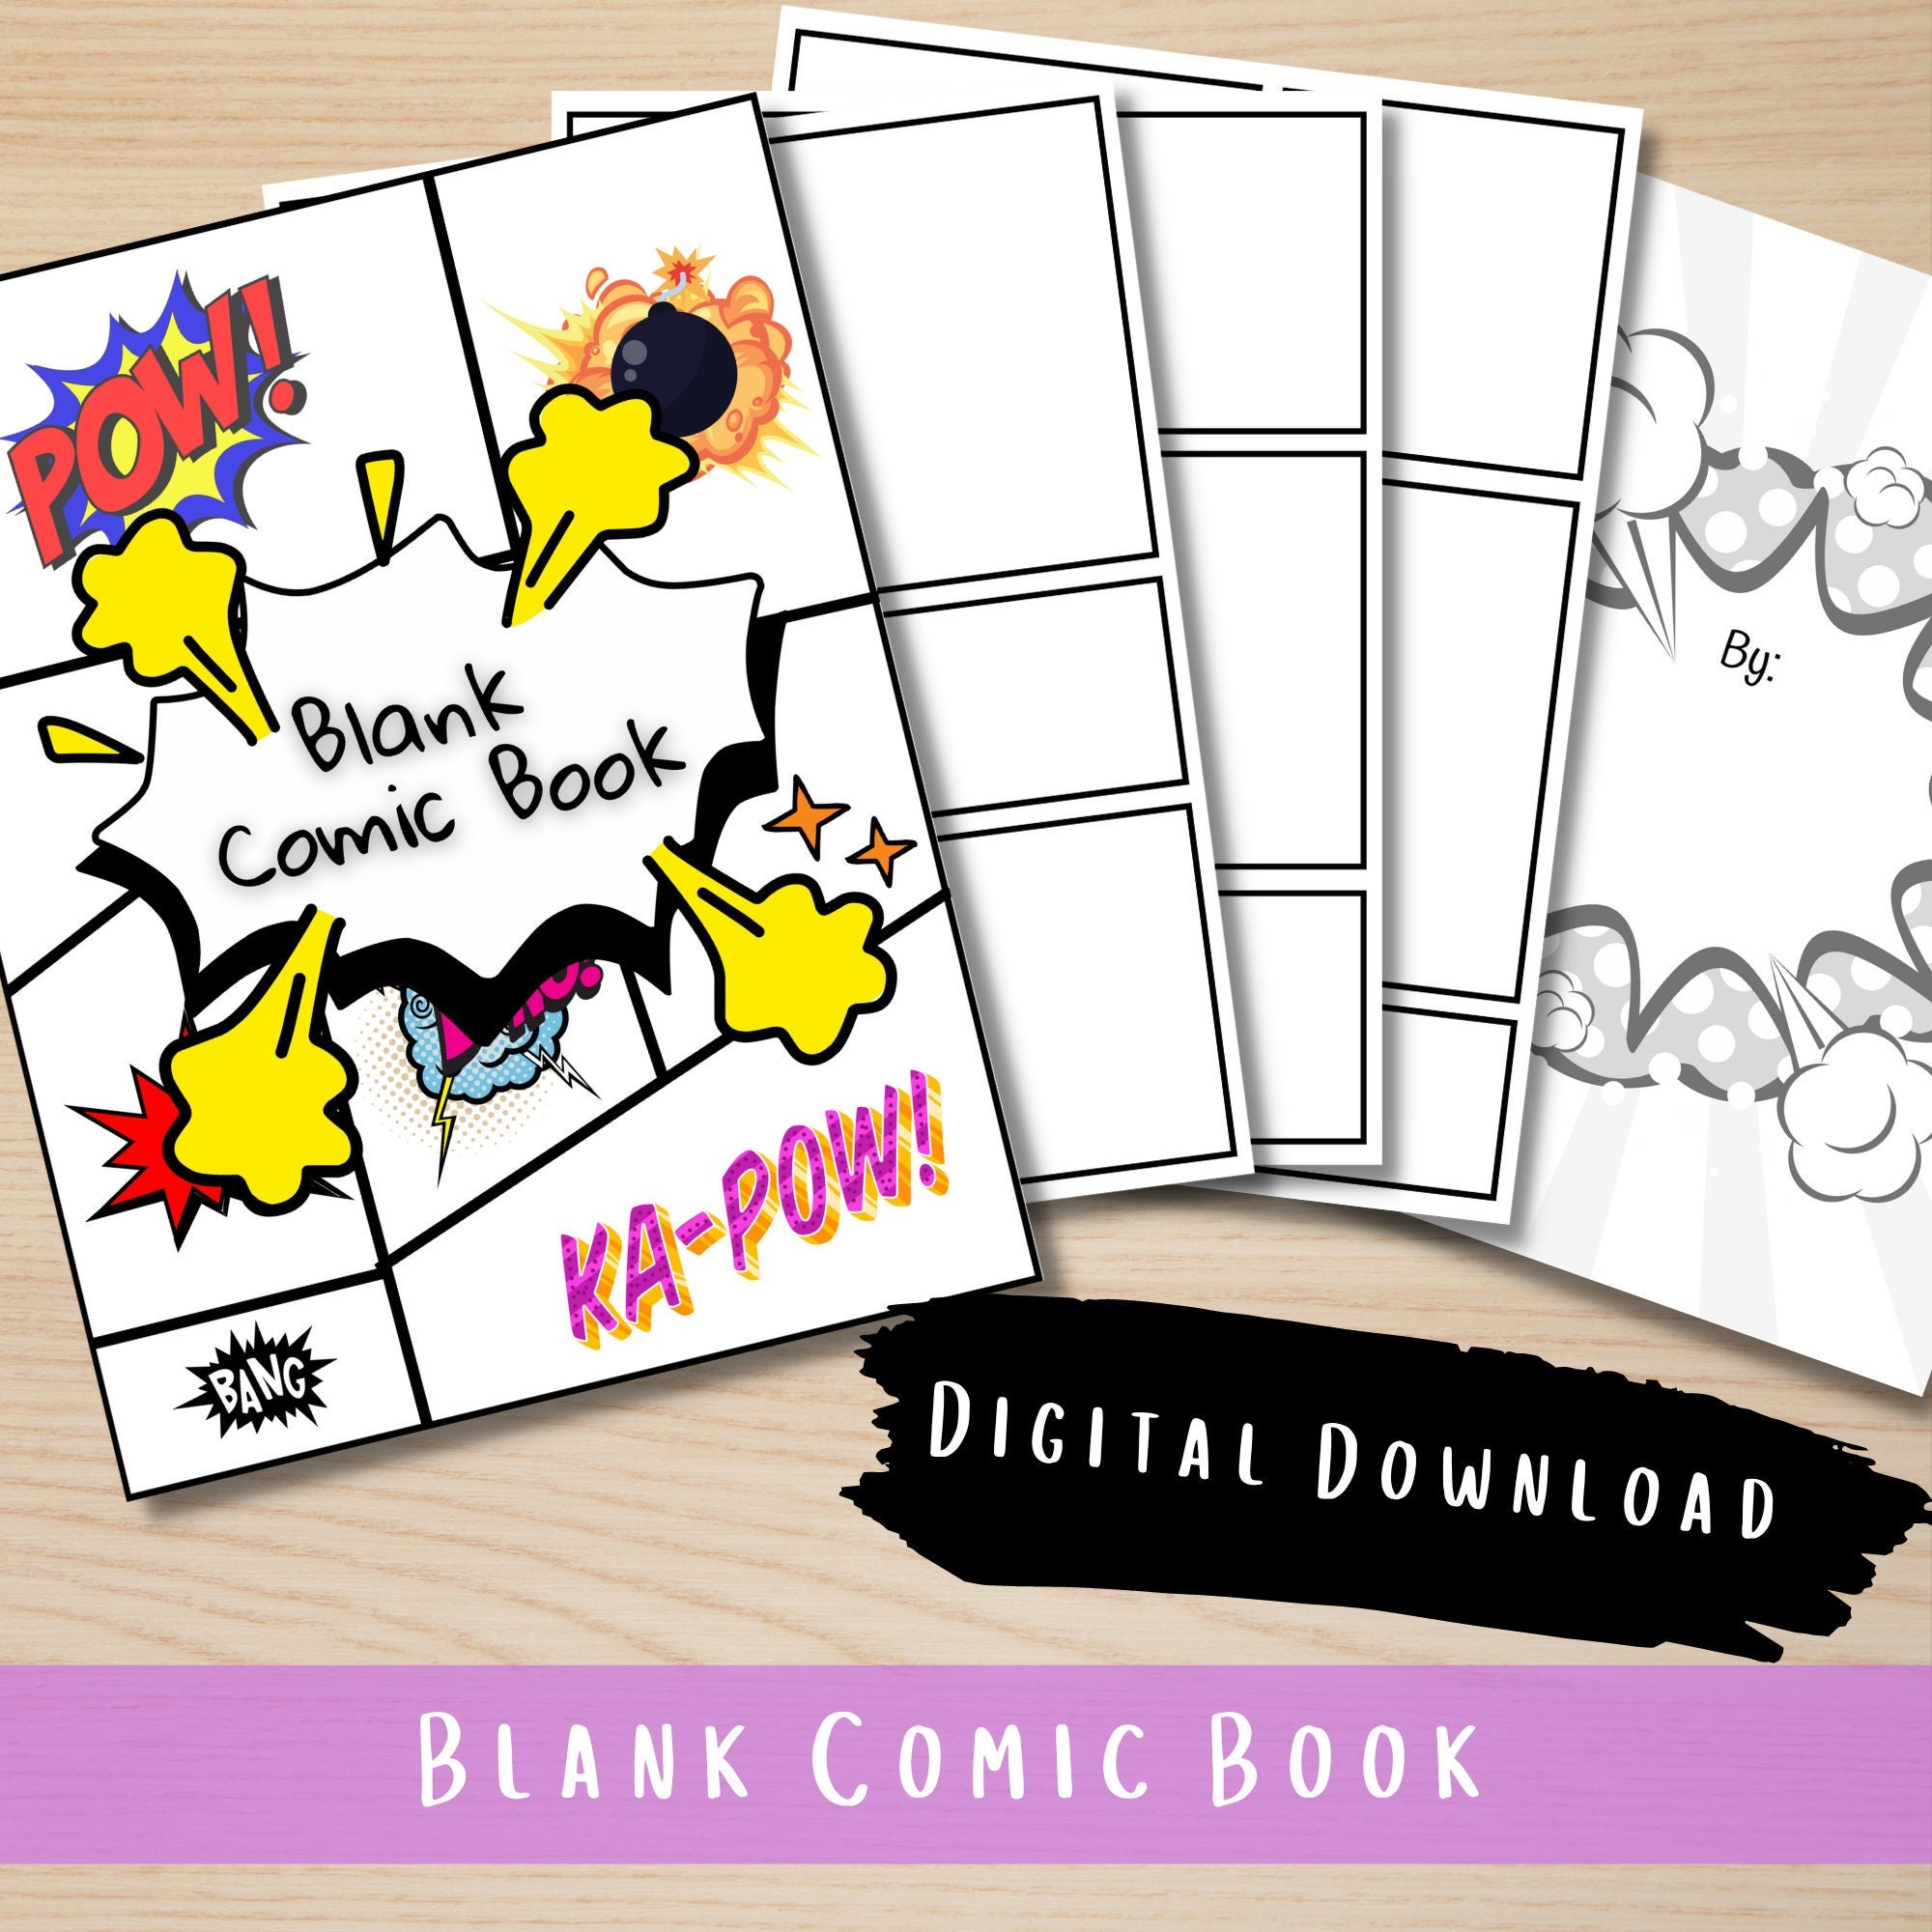 Blank Manga Comic Book: Create Your Own Manga & Anime Comics - 8.5x 11 -  PREMIUM QUALITY 120 Pages Manga Template Filled With Different Mood Frames  by Manga Art Supplies